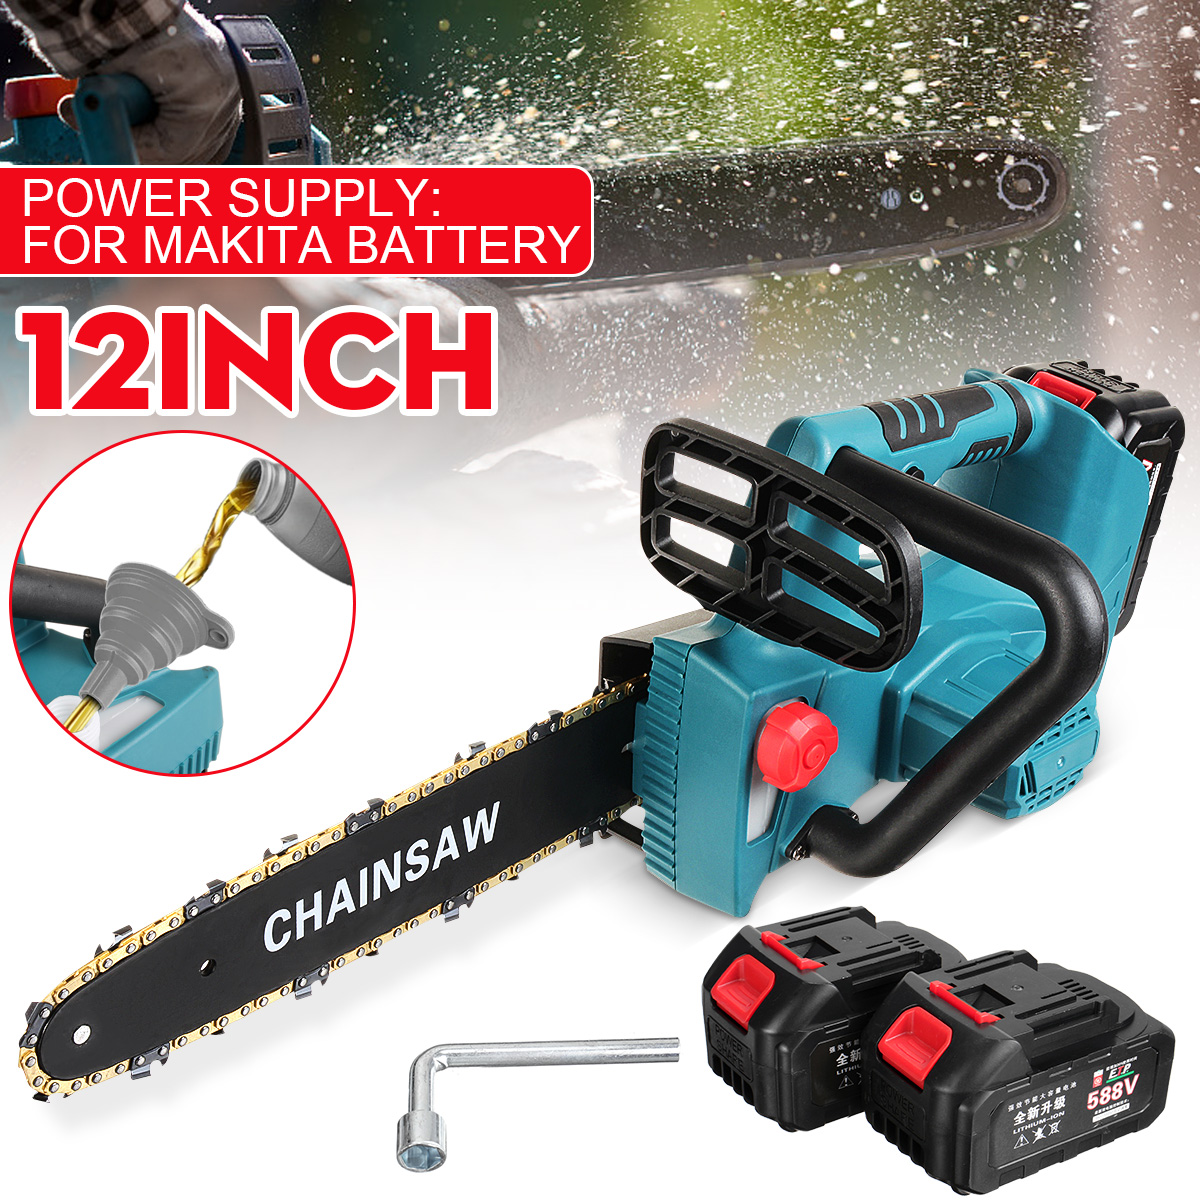 5ms-Portable-Electric-Brushless-Saw-Pruning-Chain-Saw-Rechargeable-Woodworking-Power-Tools-Wood-Cutt-1909228-1